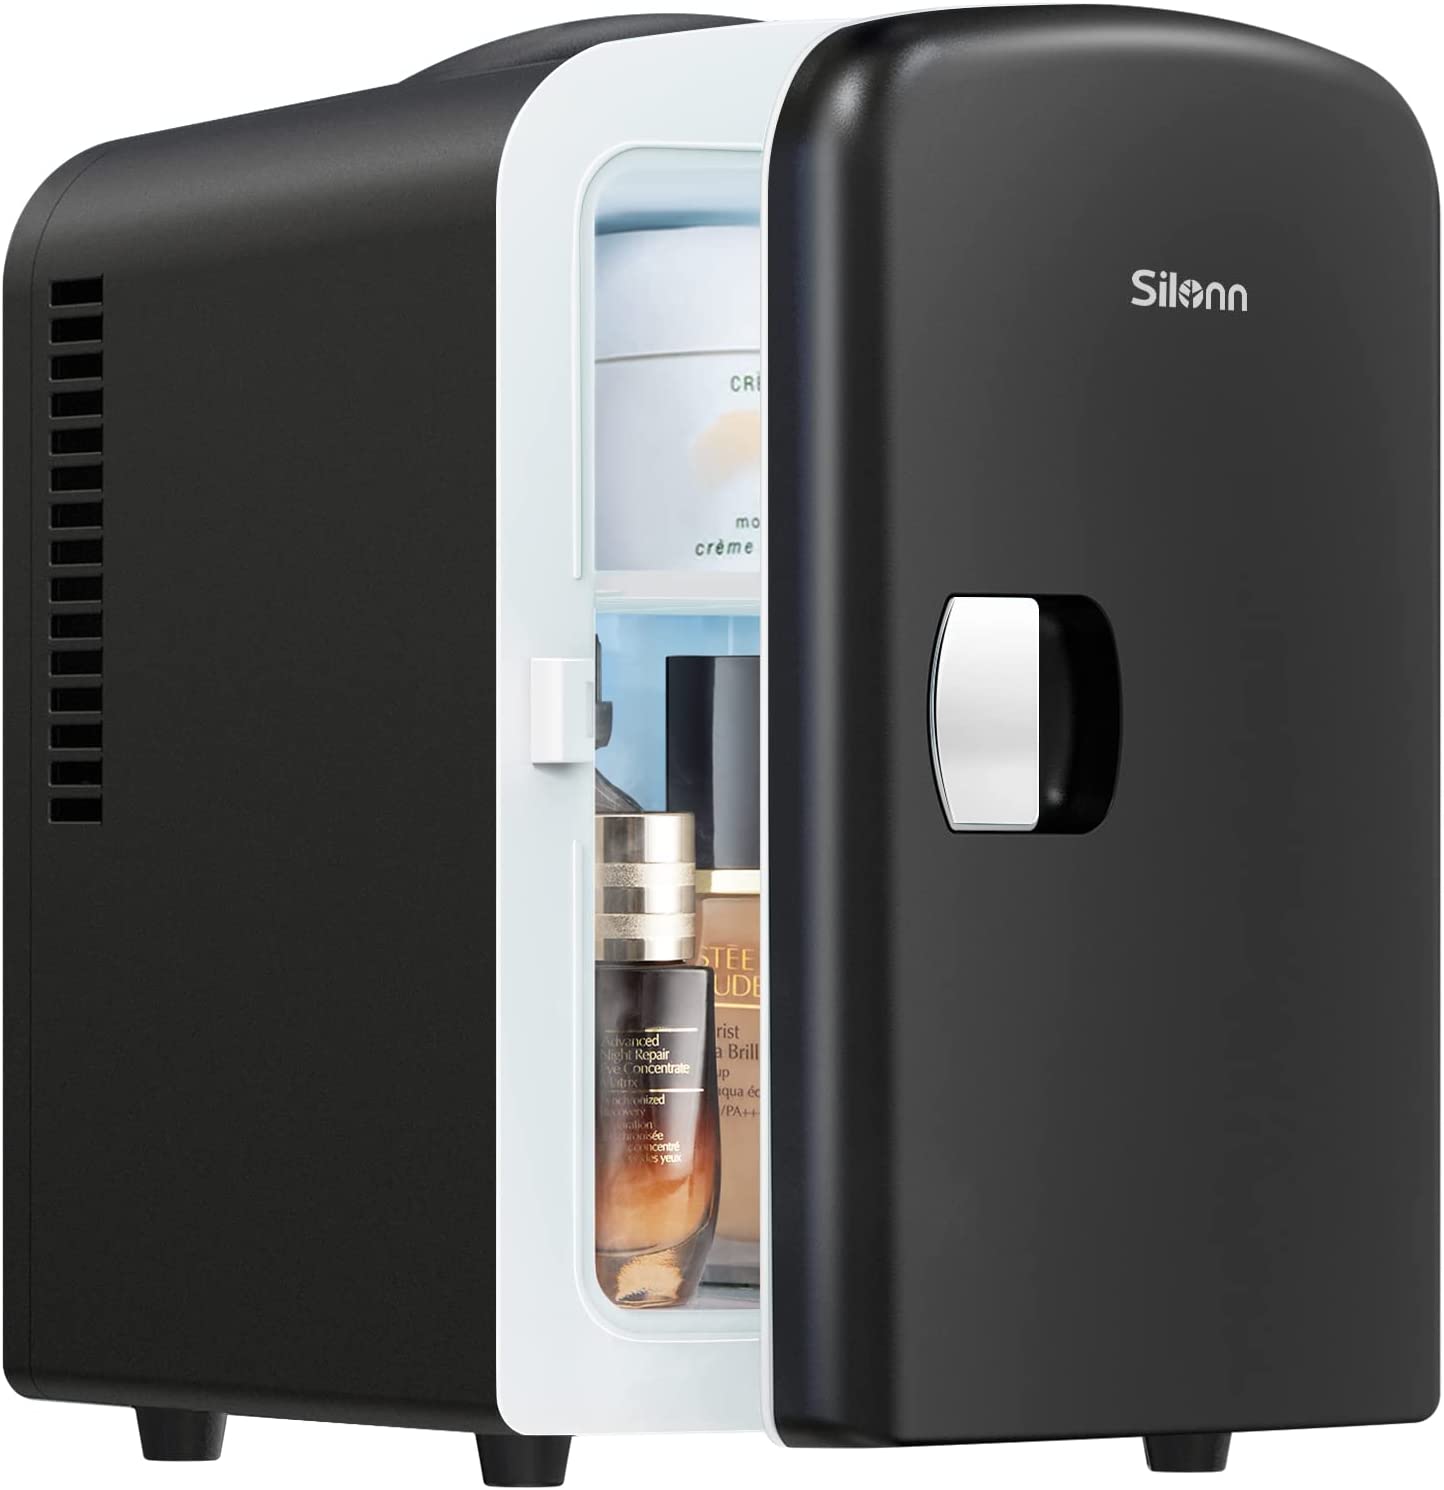  Silonn Mini Fridge, Portable Skin Care Fridge, 4 L/6 Can Cooler  and Warmer Small Refrigerator with Eco Friendly for Home, Office, Car and  College Dorm Room, Compact Refrigerator and Teal (SLRE01G1) 